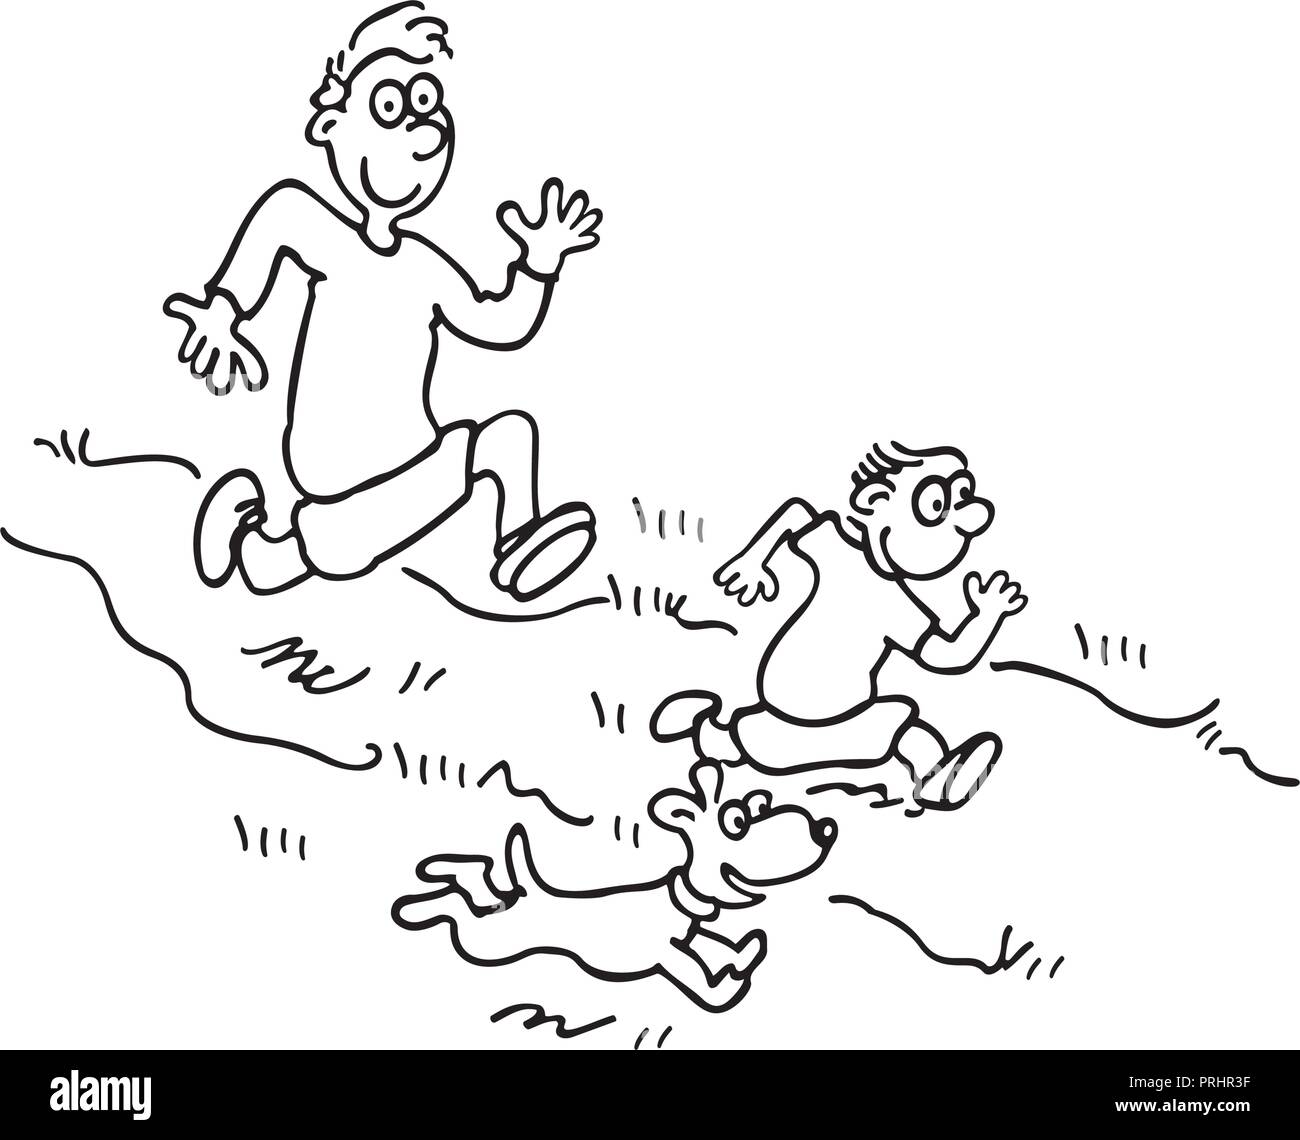 Father playing with his son. outlined cartoon handrawn sketch illustration vector. Stock Vector